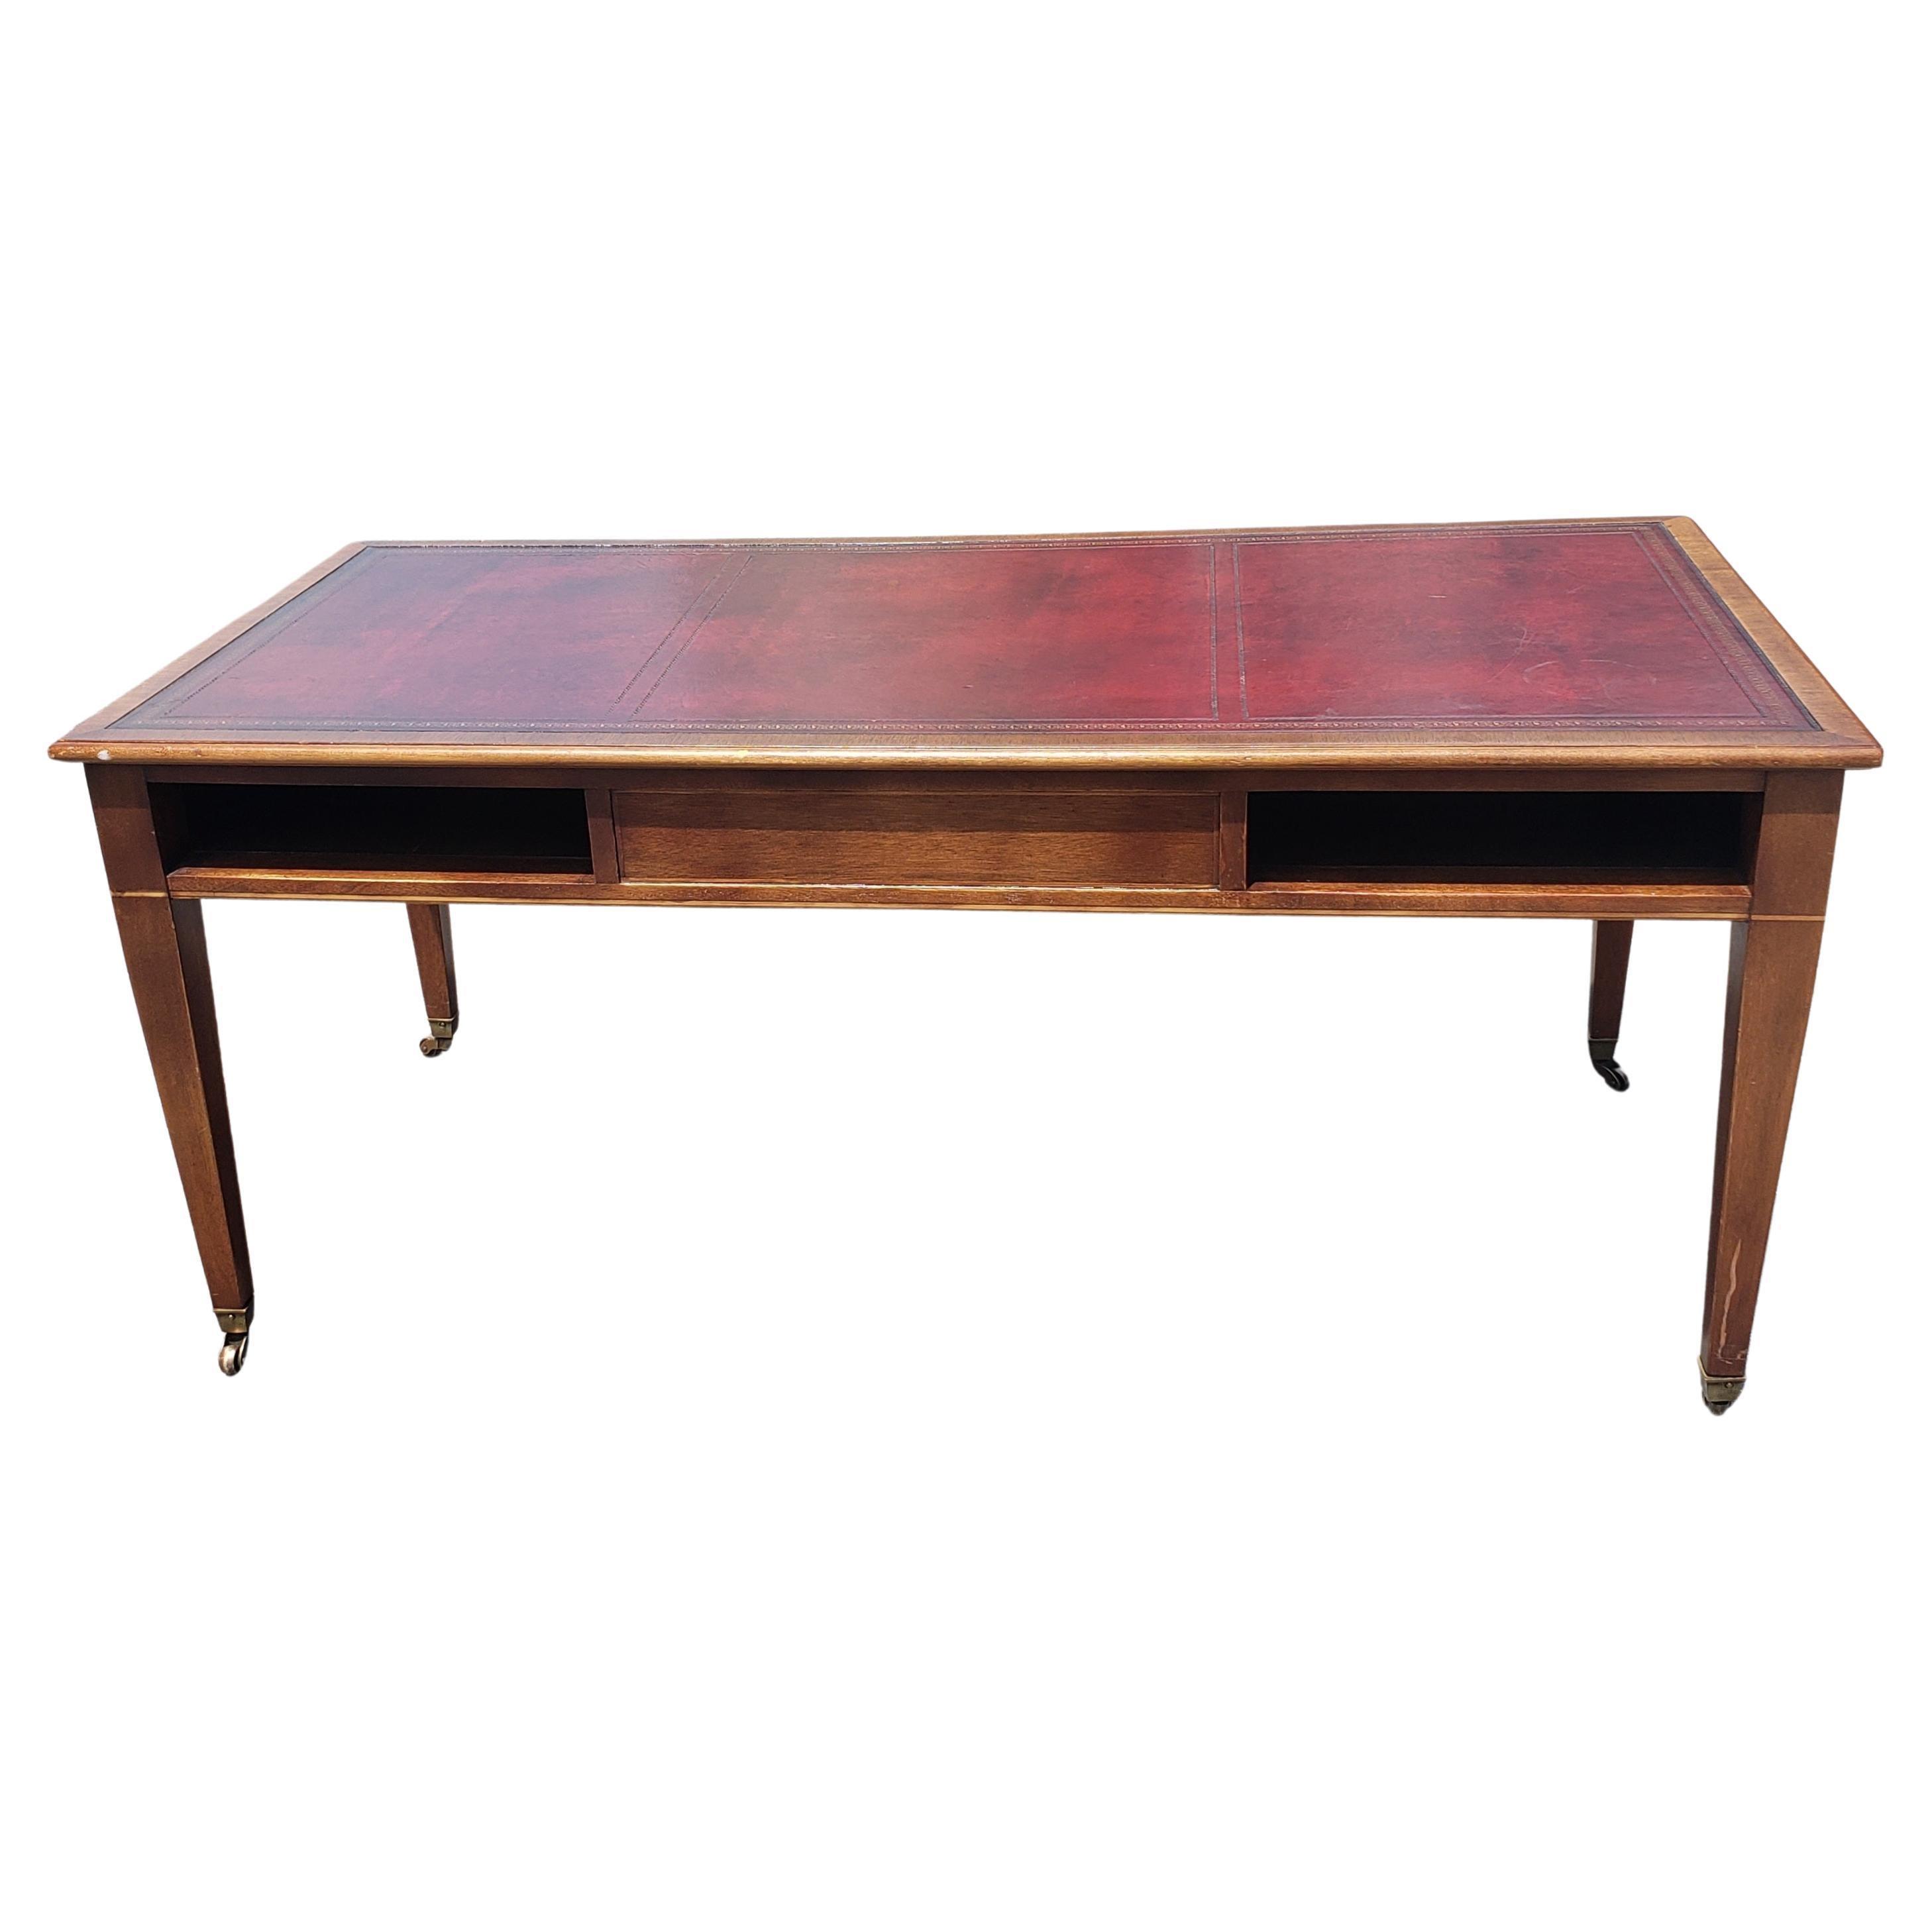 20th Century George III Style Mahogany Maroon Leather Inset Top Coffee Table on Wheels